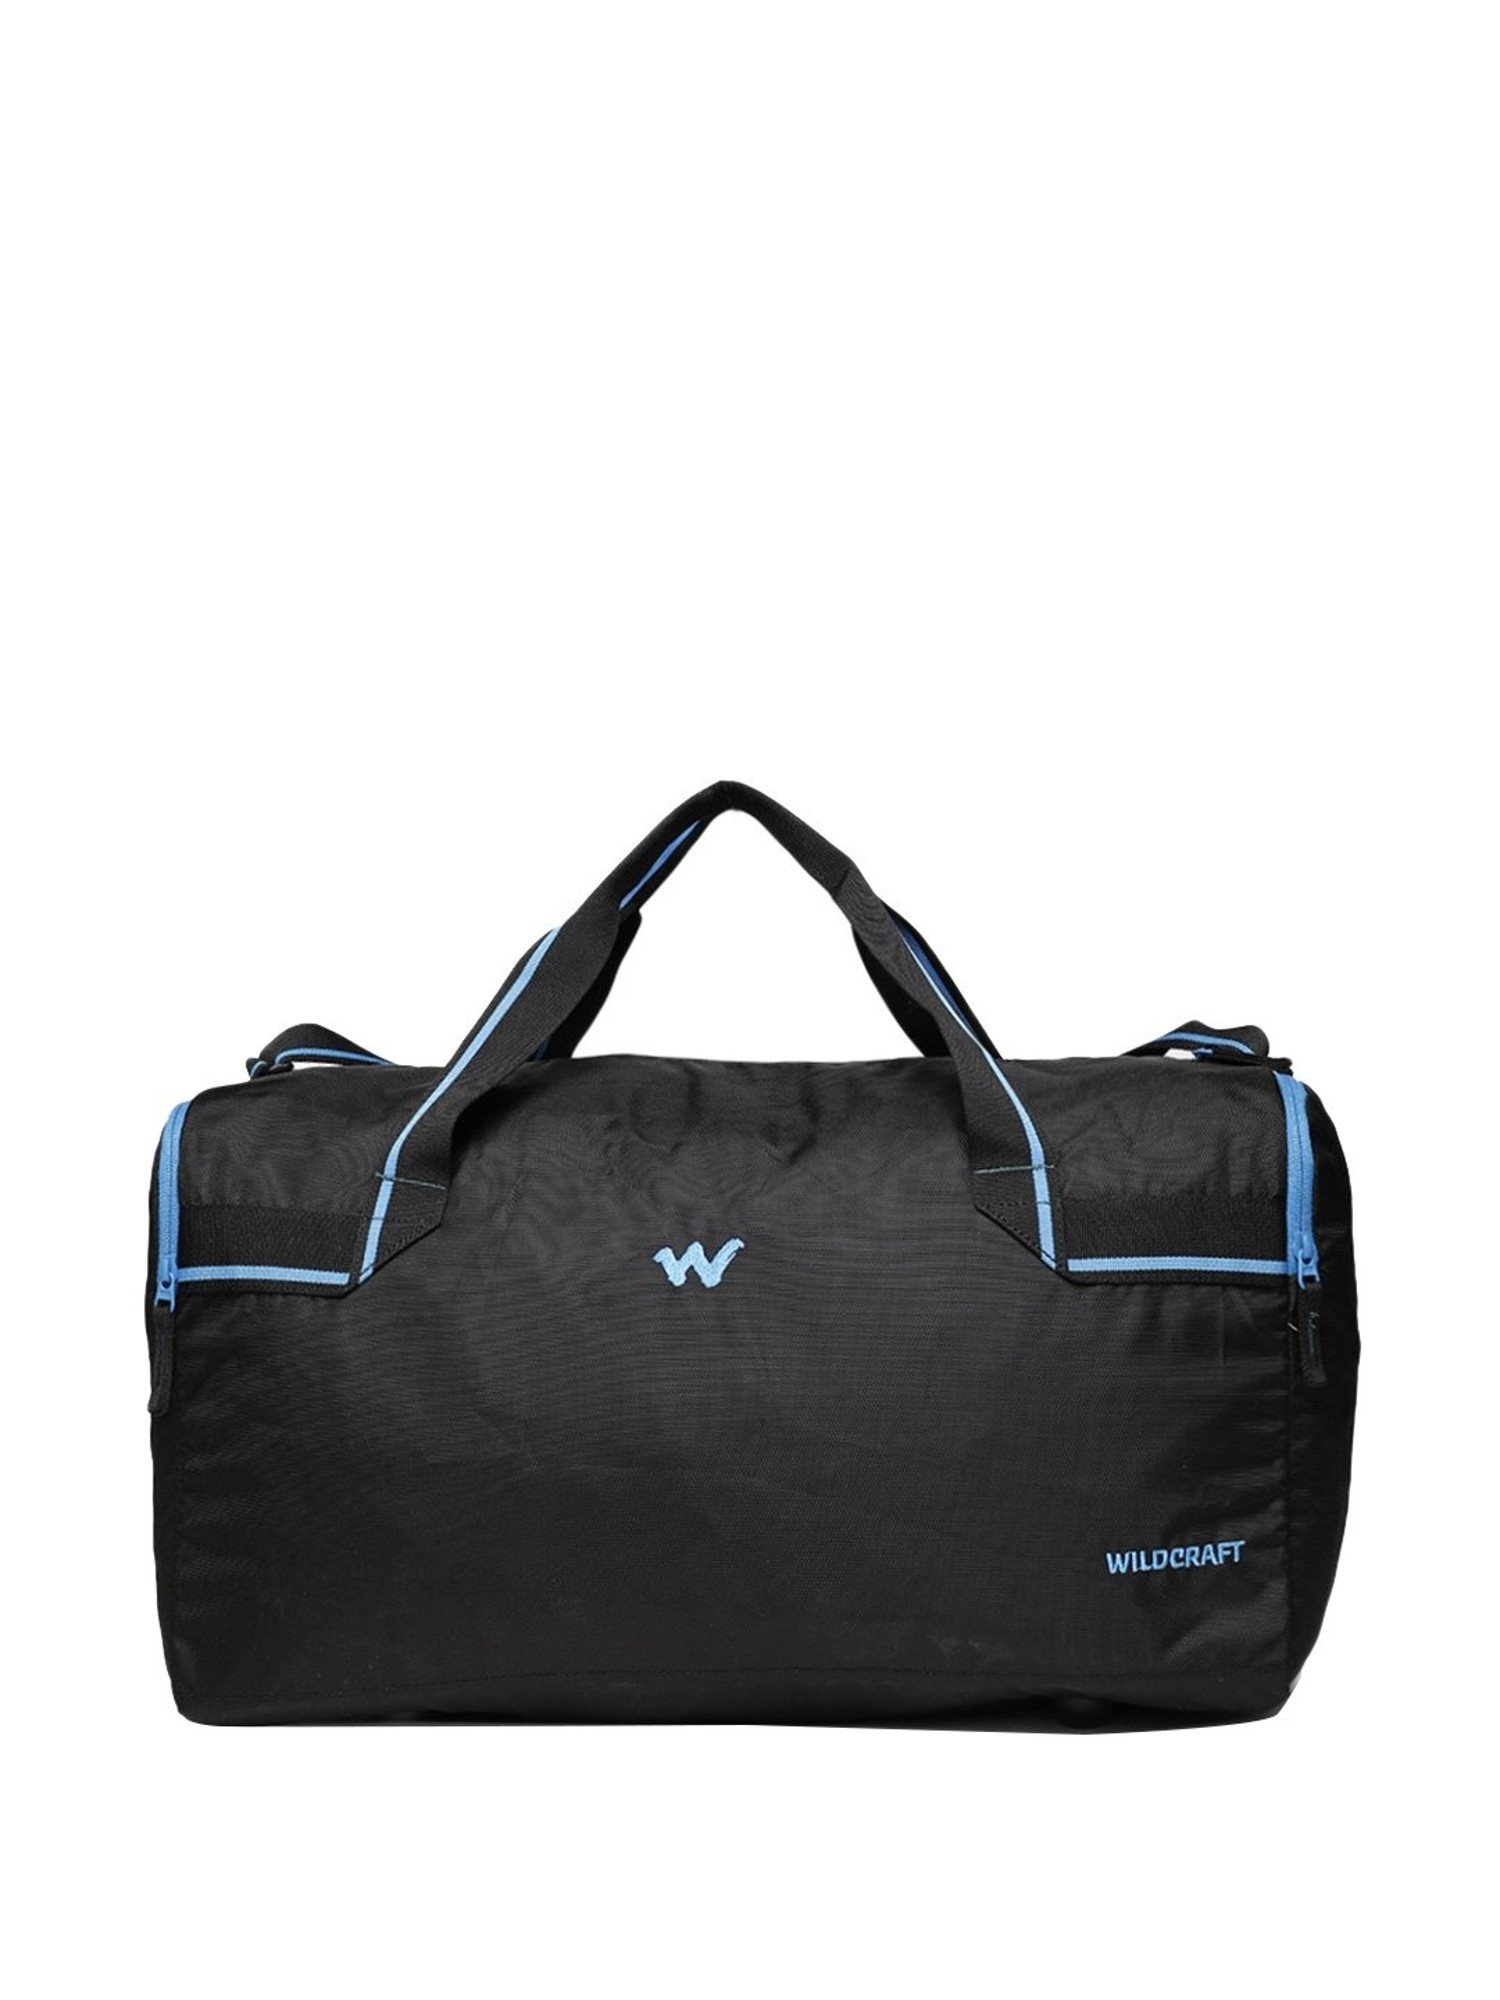 WILDCRAFT Pac N Go Travel Bag Duffle 18 2EVYND4WXWU (Size - Free, Black) in  Bangalore at best price by Wildcraft Revolution - Justdial